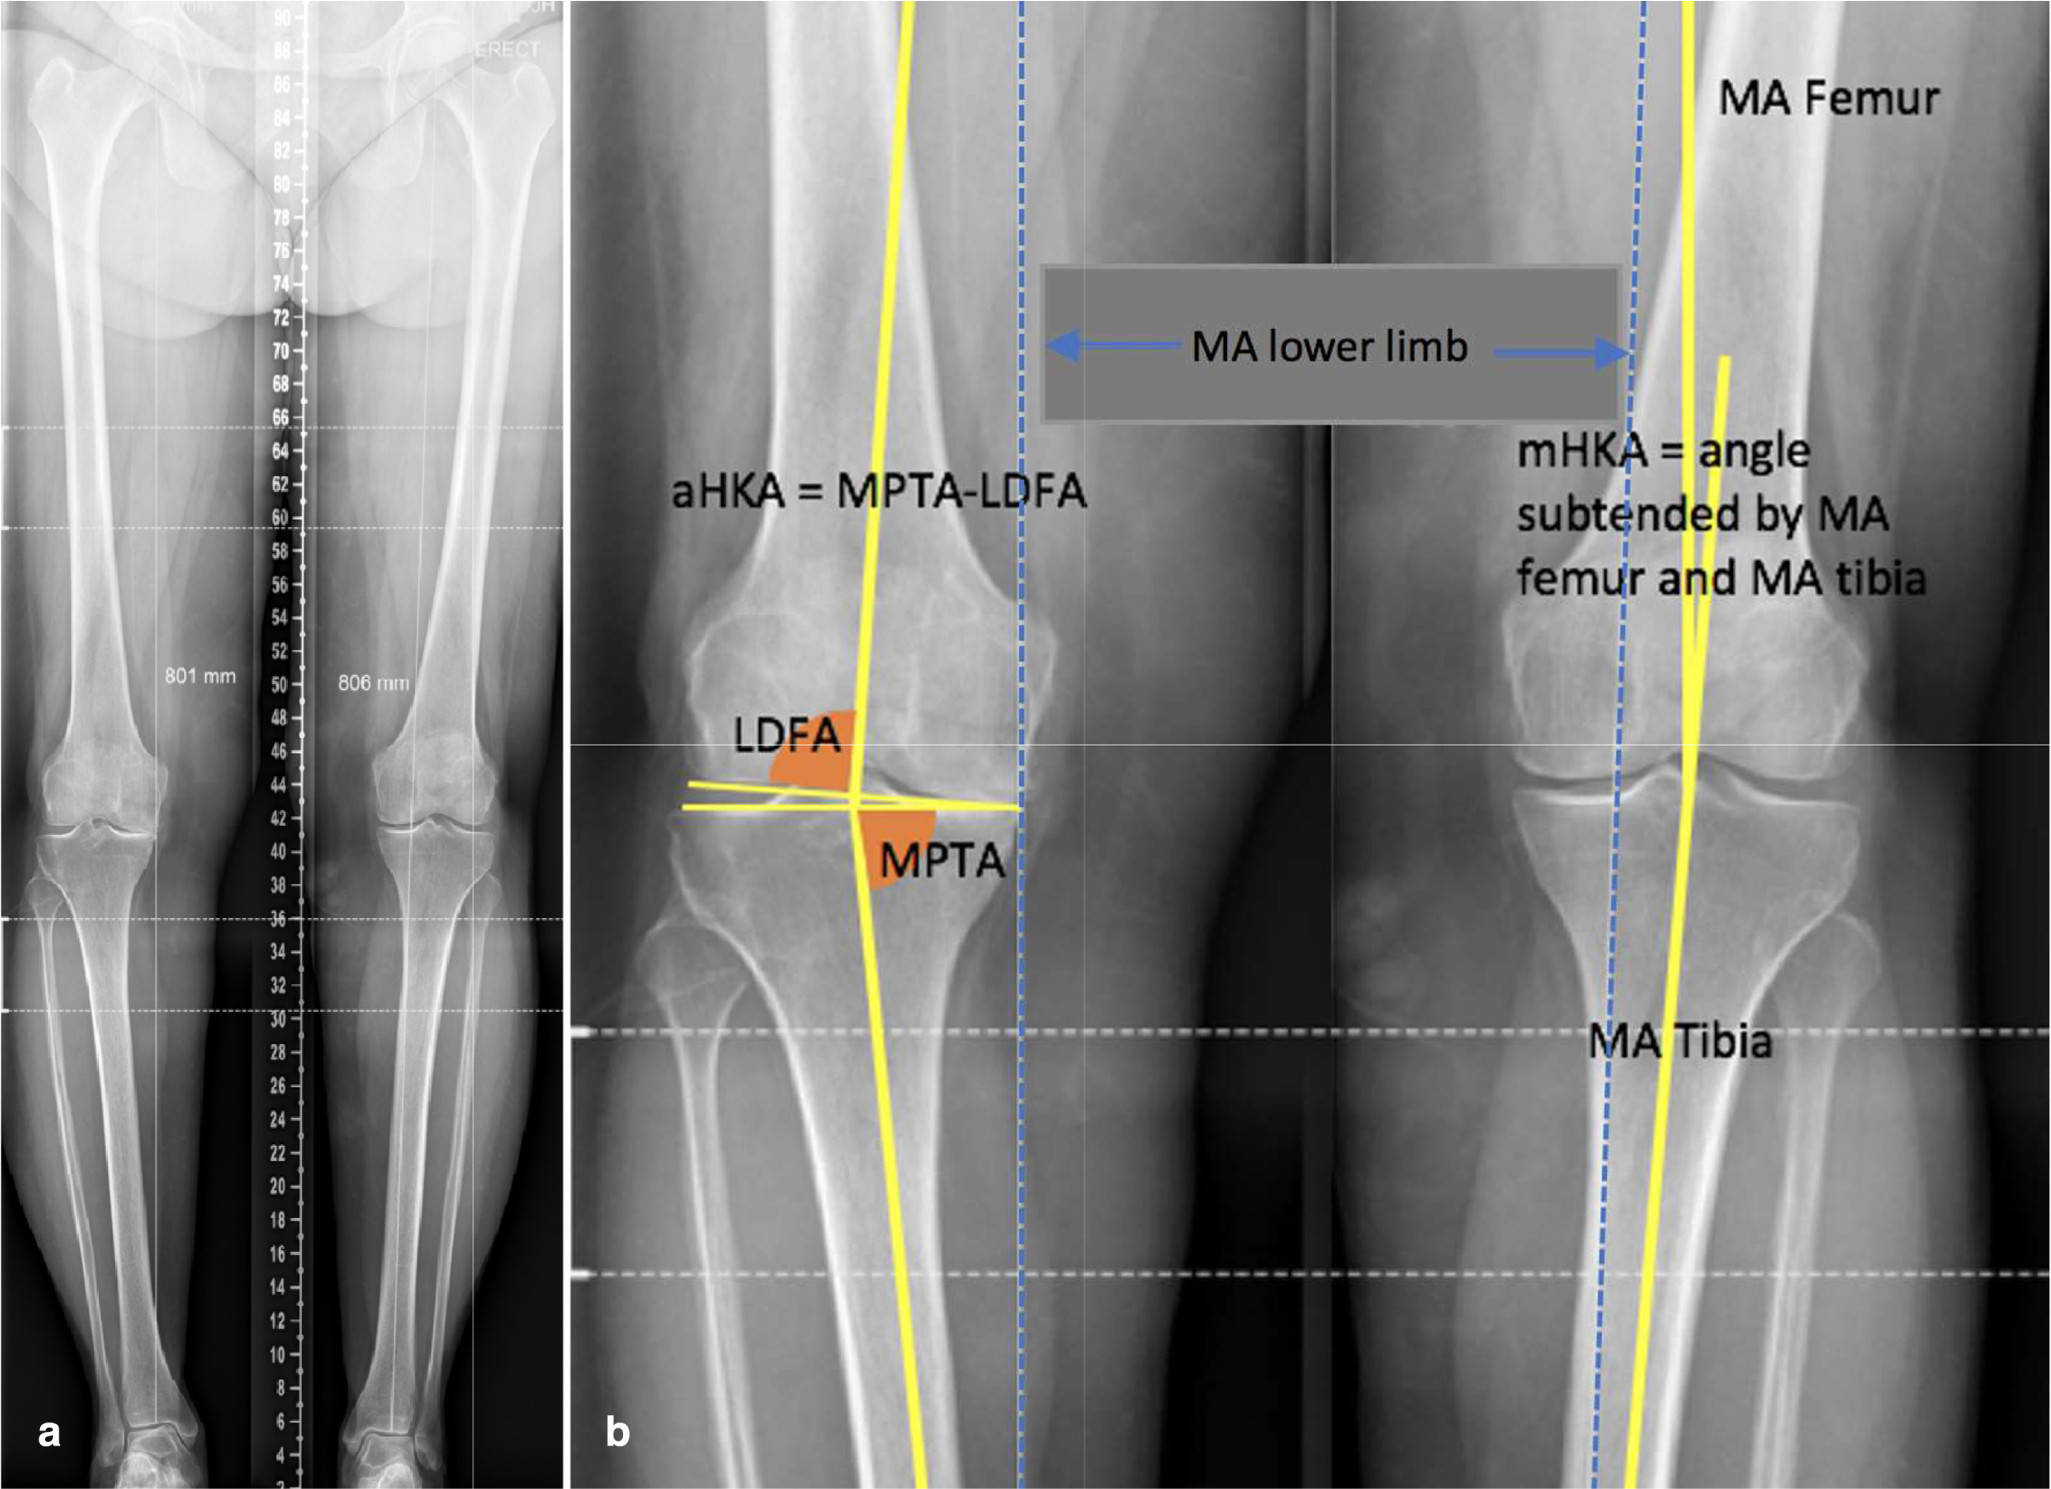 Fig. 1 
            a) Full preoperative long leg standing radiograph. Grade 4 Kellgren-Lawrence tibiofemoral osteoarthritis of right knee. Grade 1 tibiofemoral osteoarthritis left knee, serving as matched control. b) Same long leg radiograph with digital radiological reference lines. Right knee demonstrates calculation of constitutional alignment in the arthritic knee using aHKA algorithm. Left normal knee shows calculation of mHKA. aHKA, arithmetic hip-knee-ankle angle algorithm; LDFA, lateral distal femoral angle; MPTA, medial proximal tibial angle; mHKA, mechanical hip-knee-ankle angle; MA, mechanical axis.
          